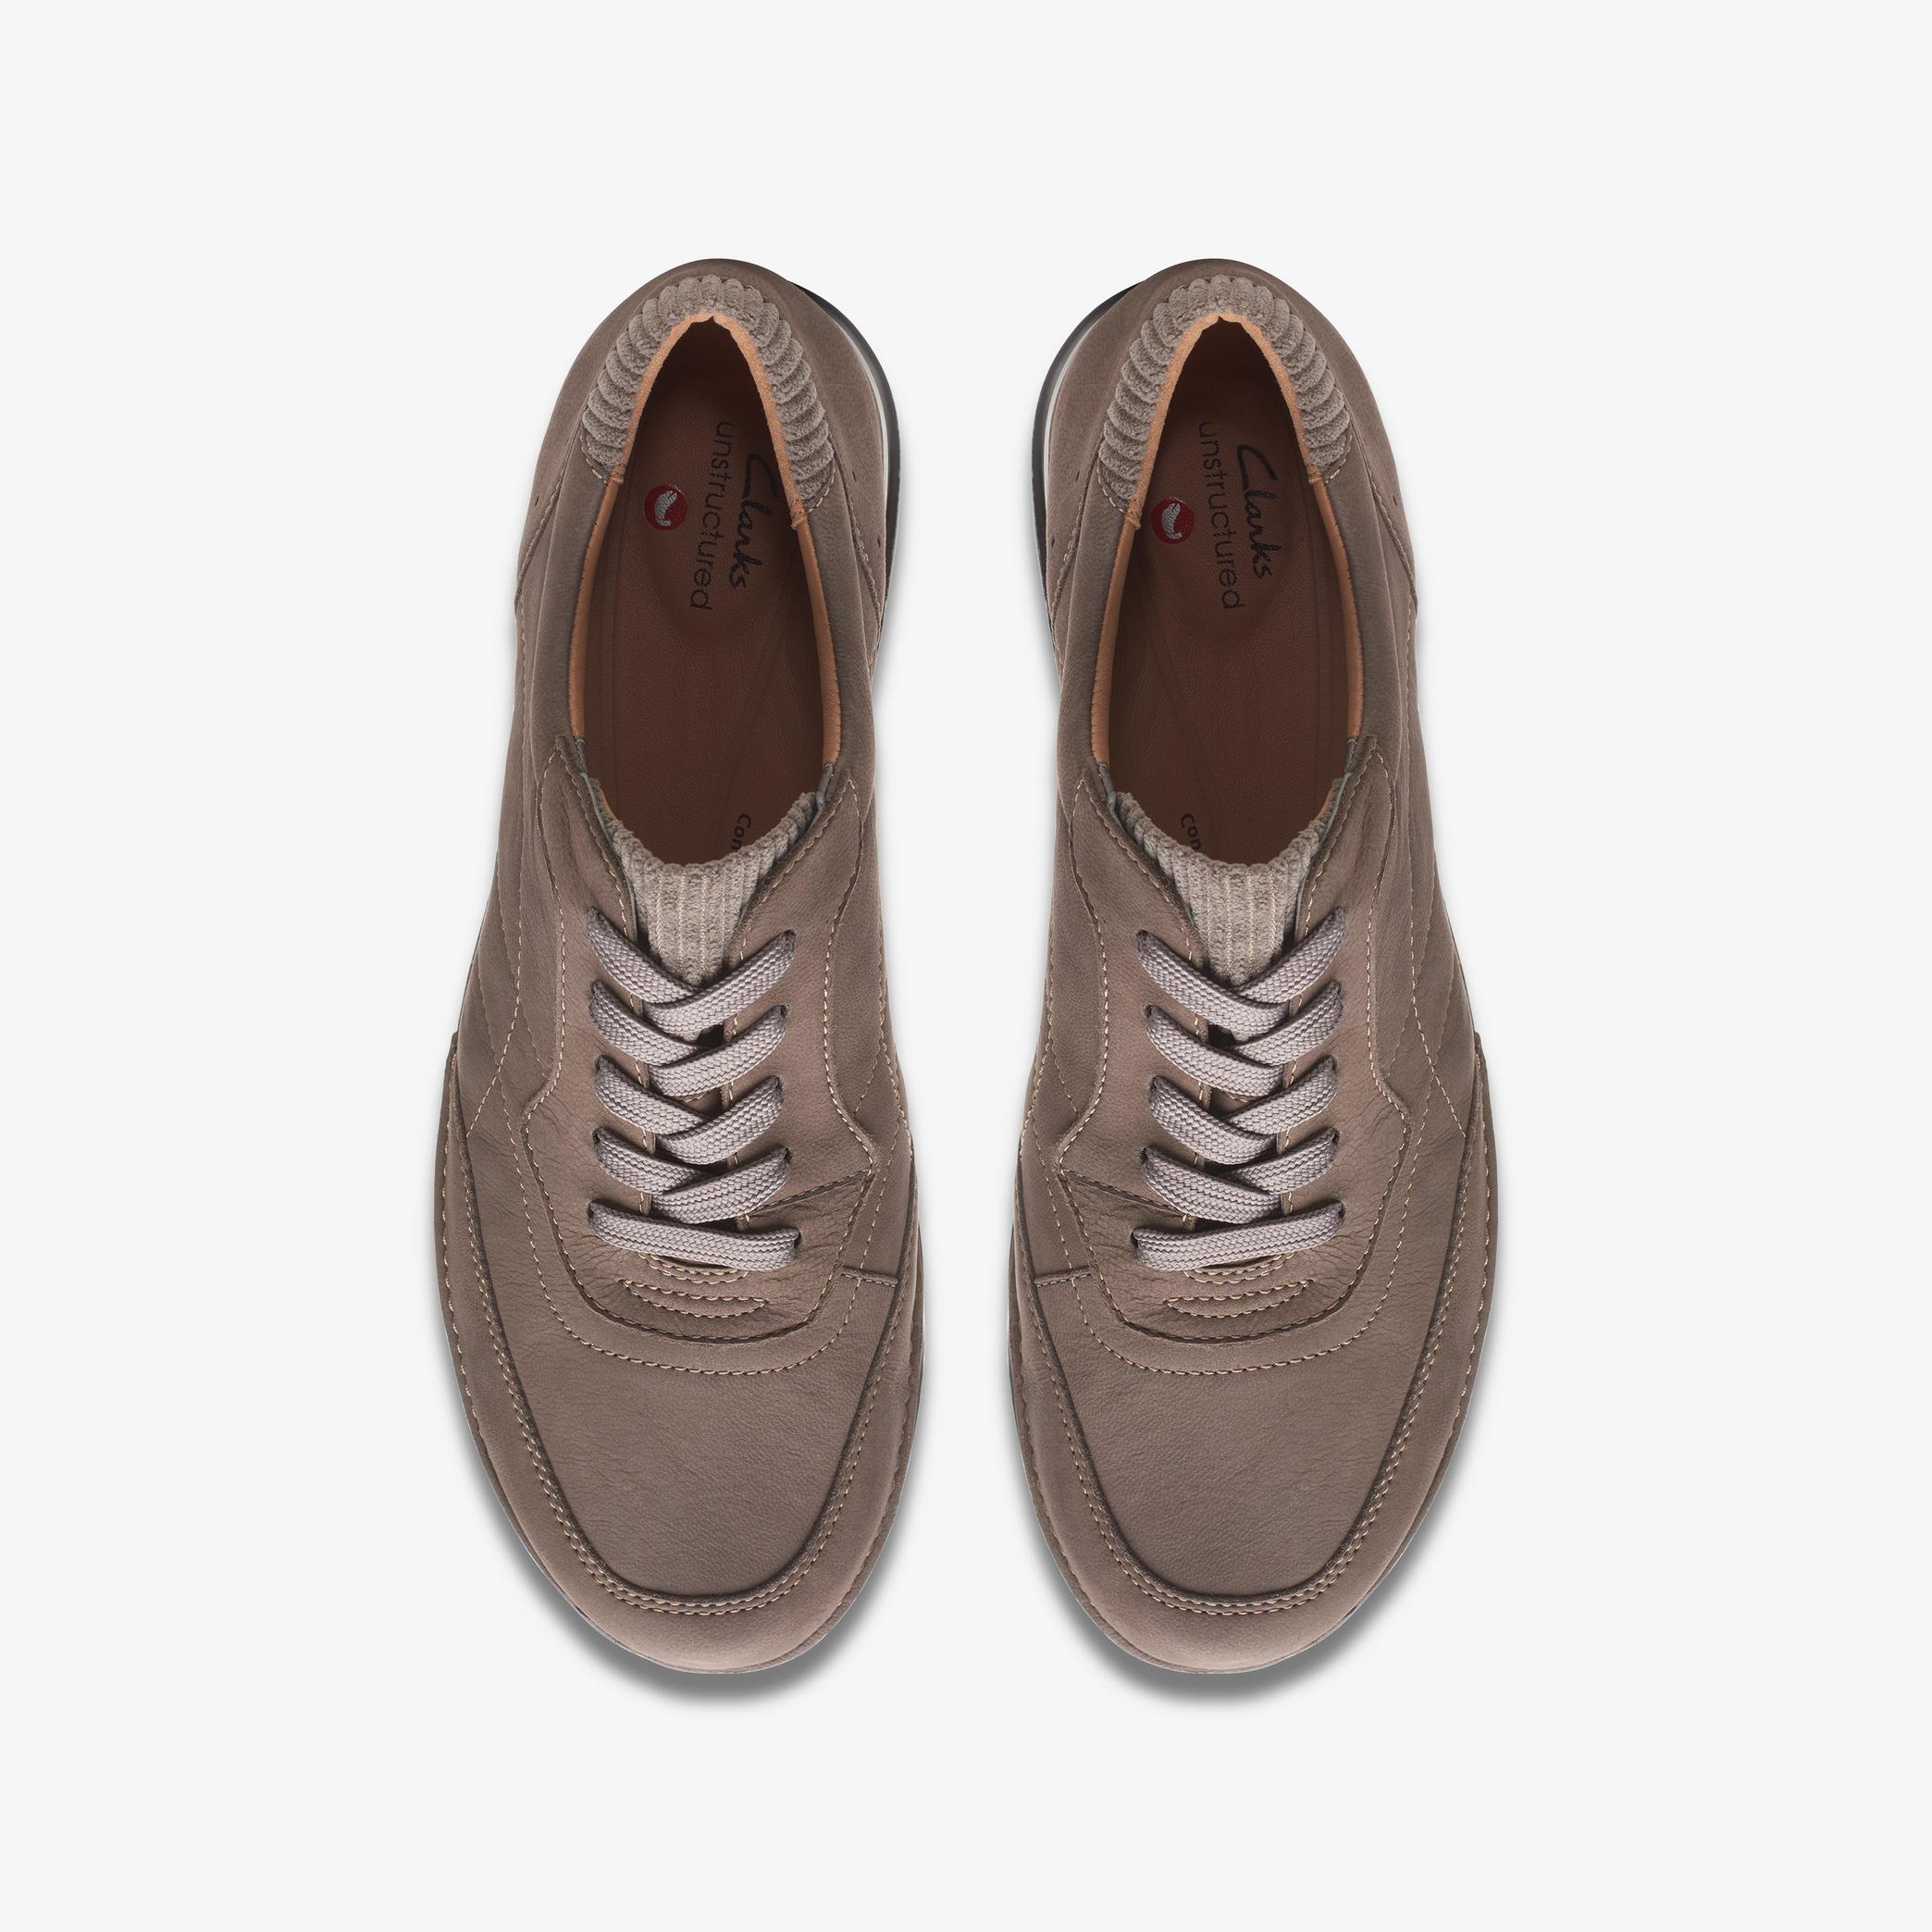 Appley Tie Taupe Nubuck Shoes, view 6 of 6